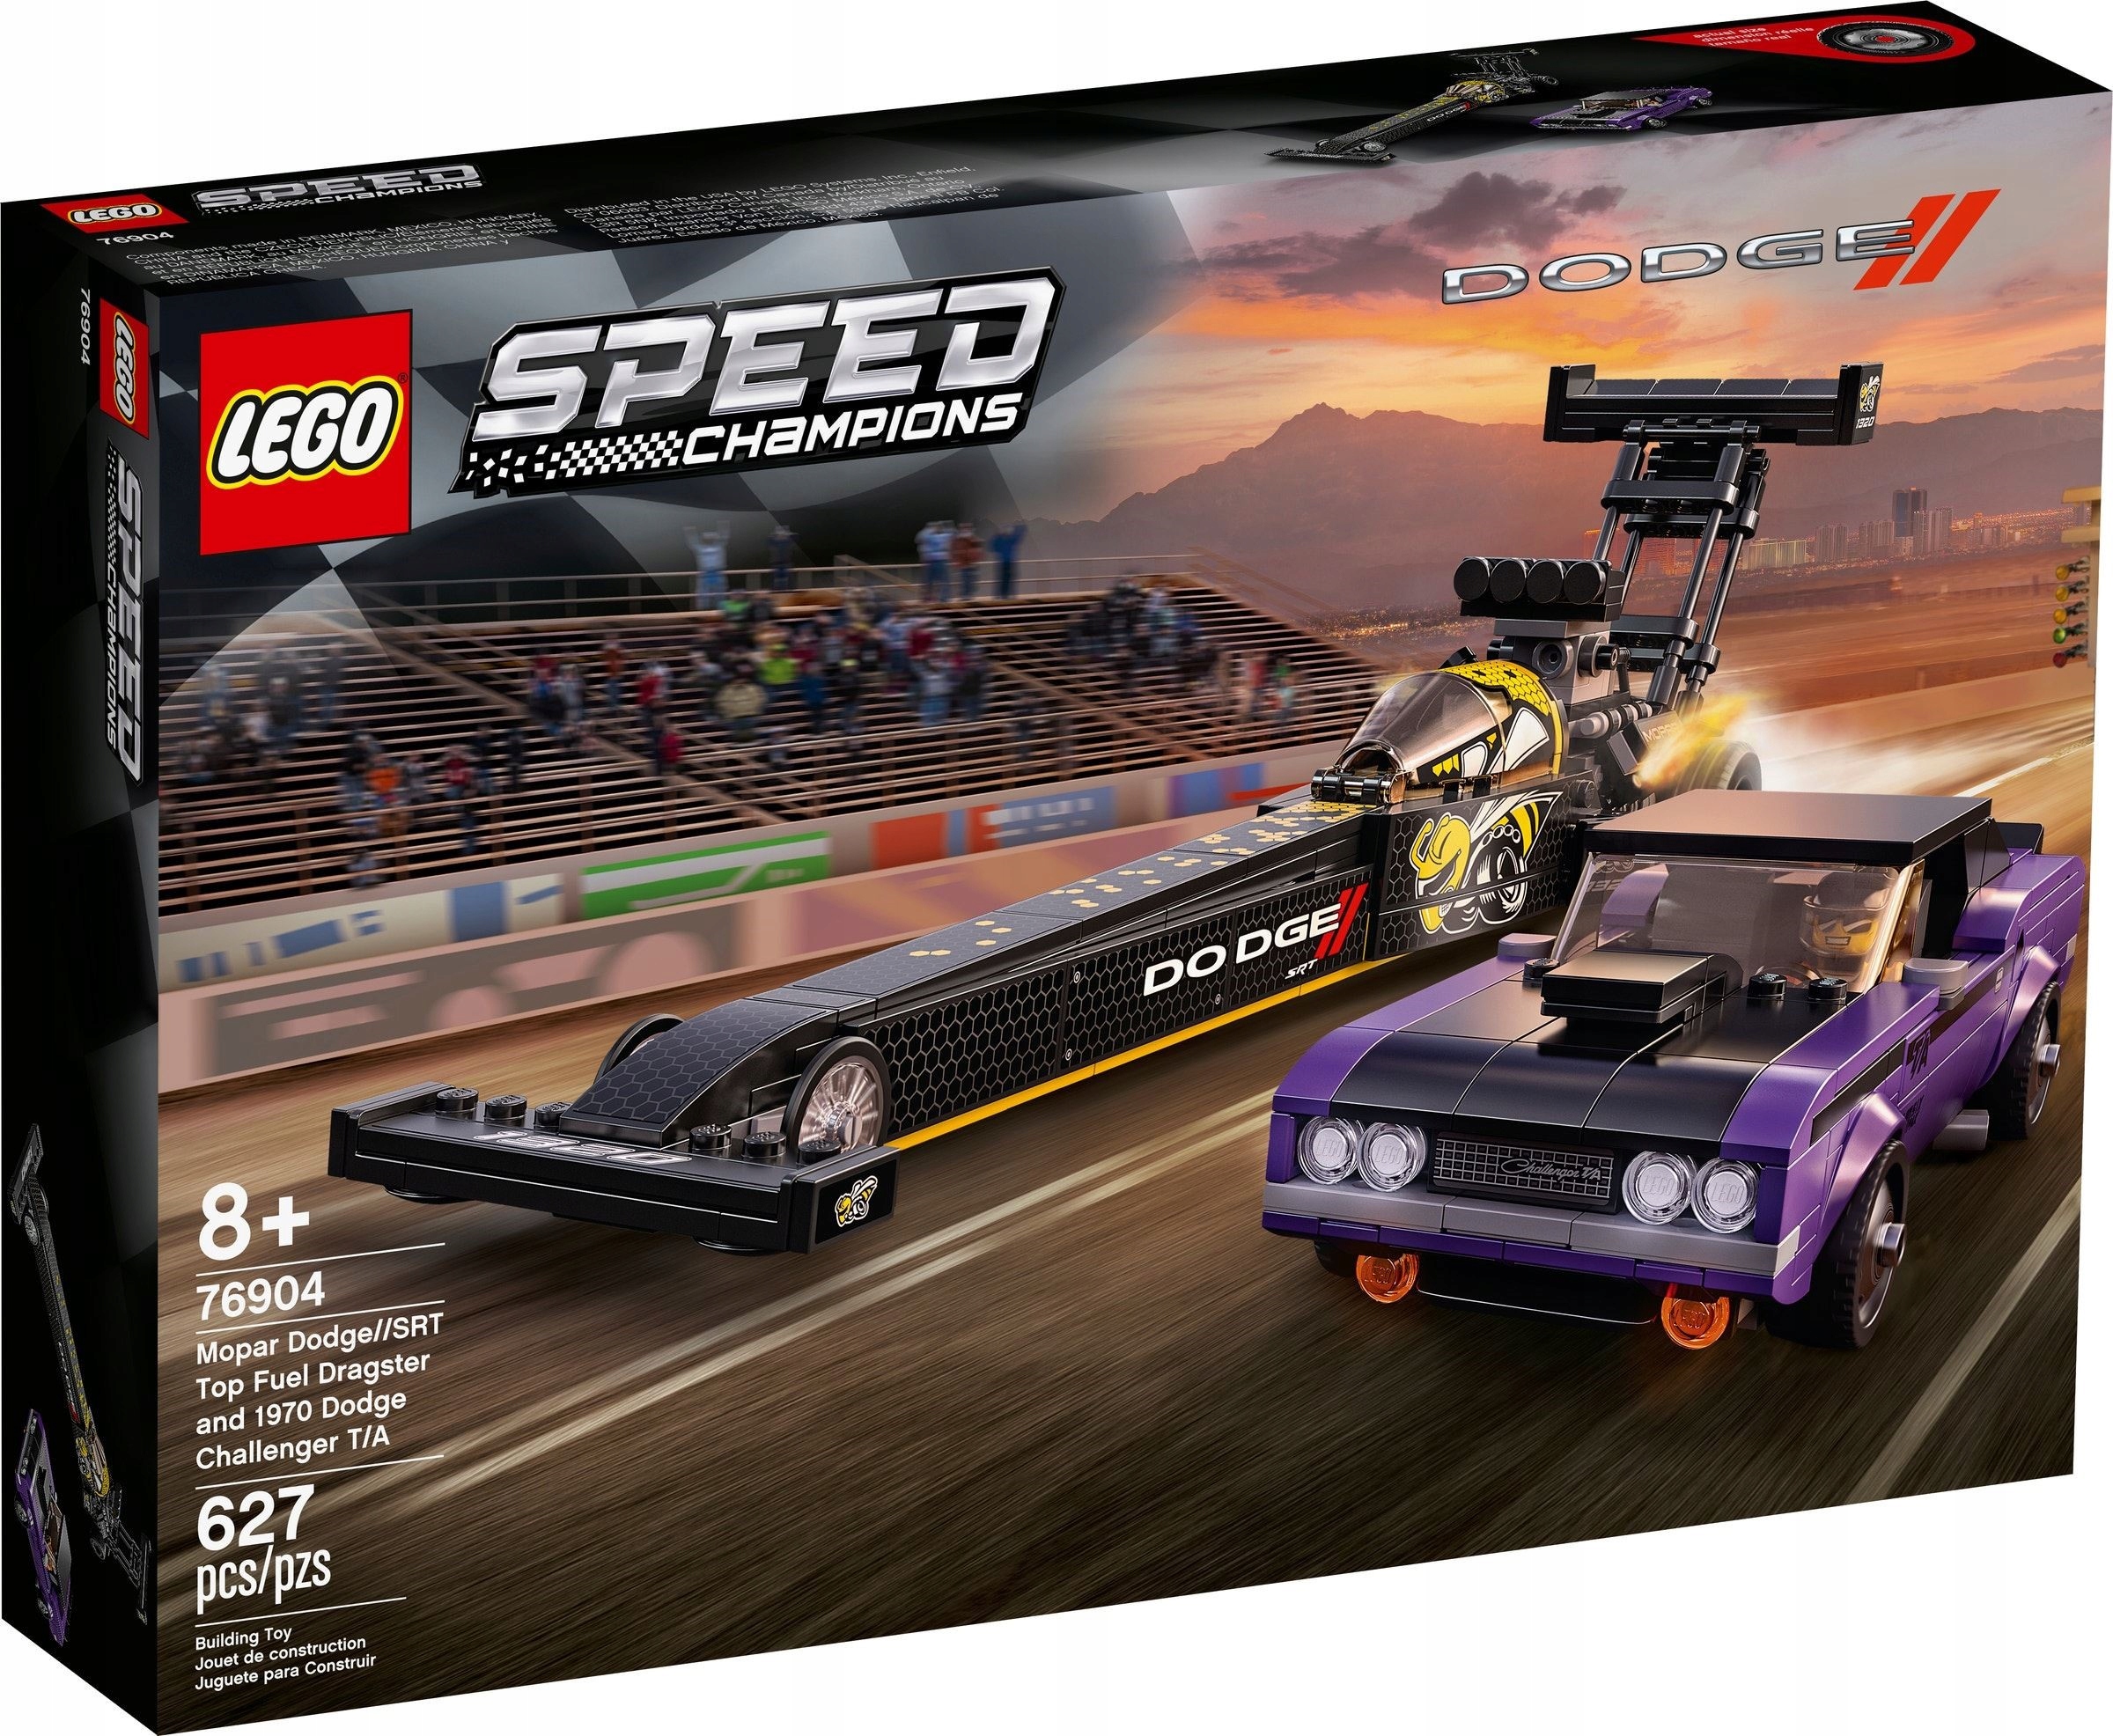 LEGO SPEED CHAMPIONS Dodge Dragster and Challe 76904